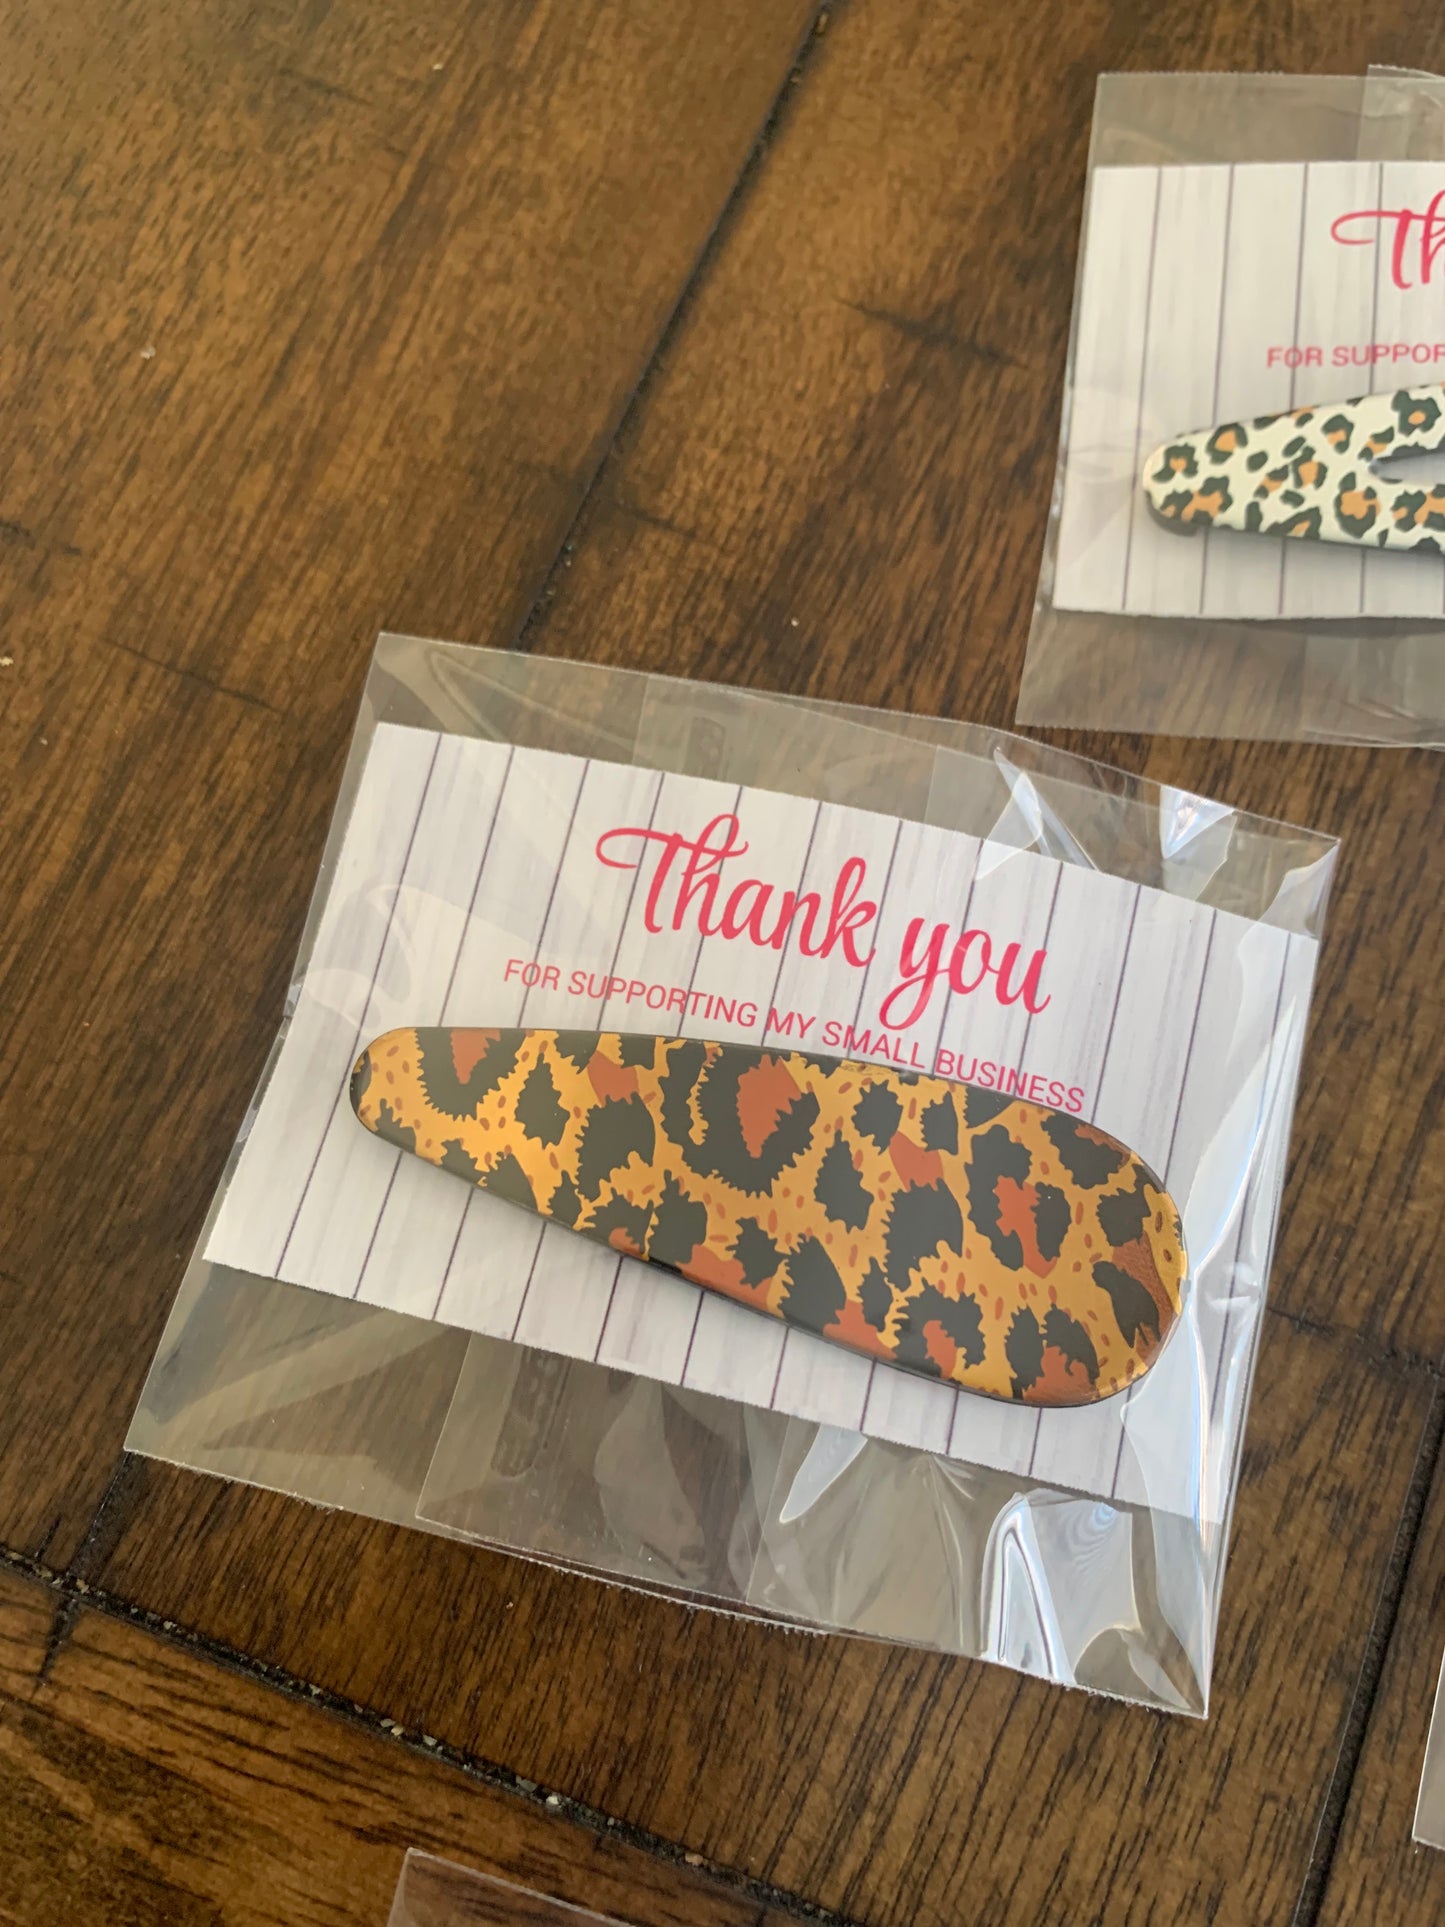 Bling Assorted large animal print hair clips thank you gift pack of 6